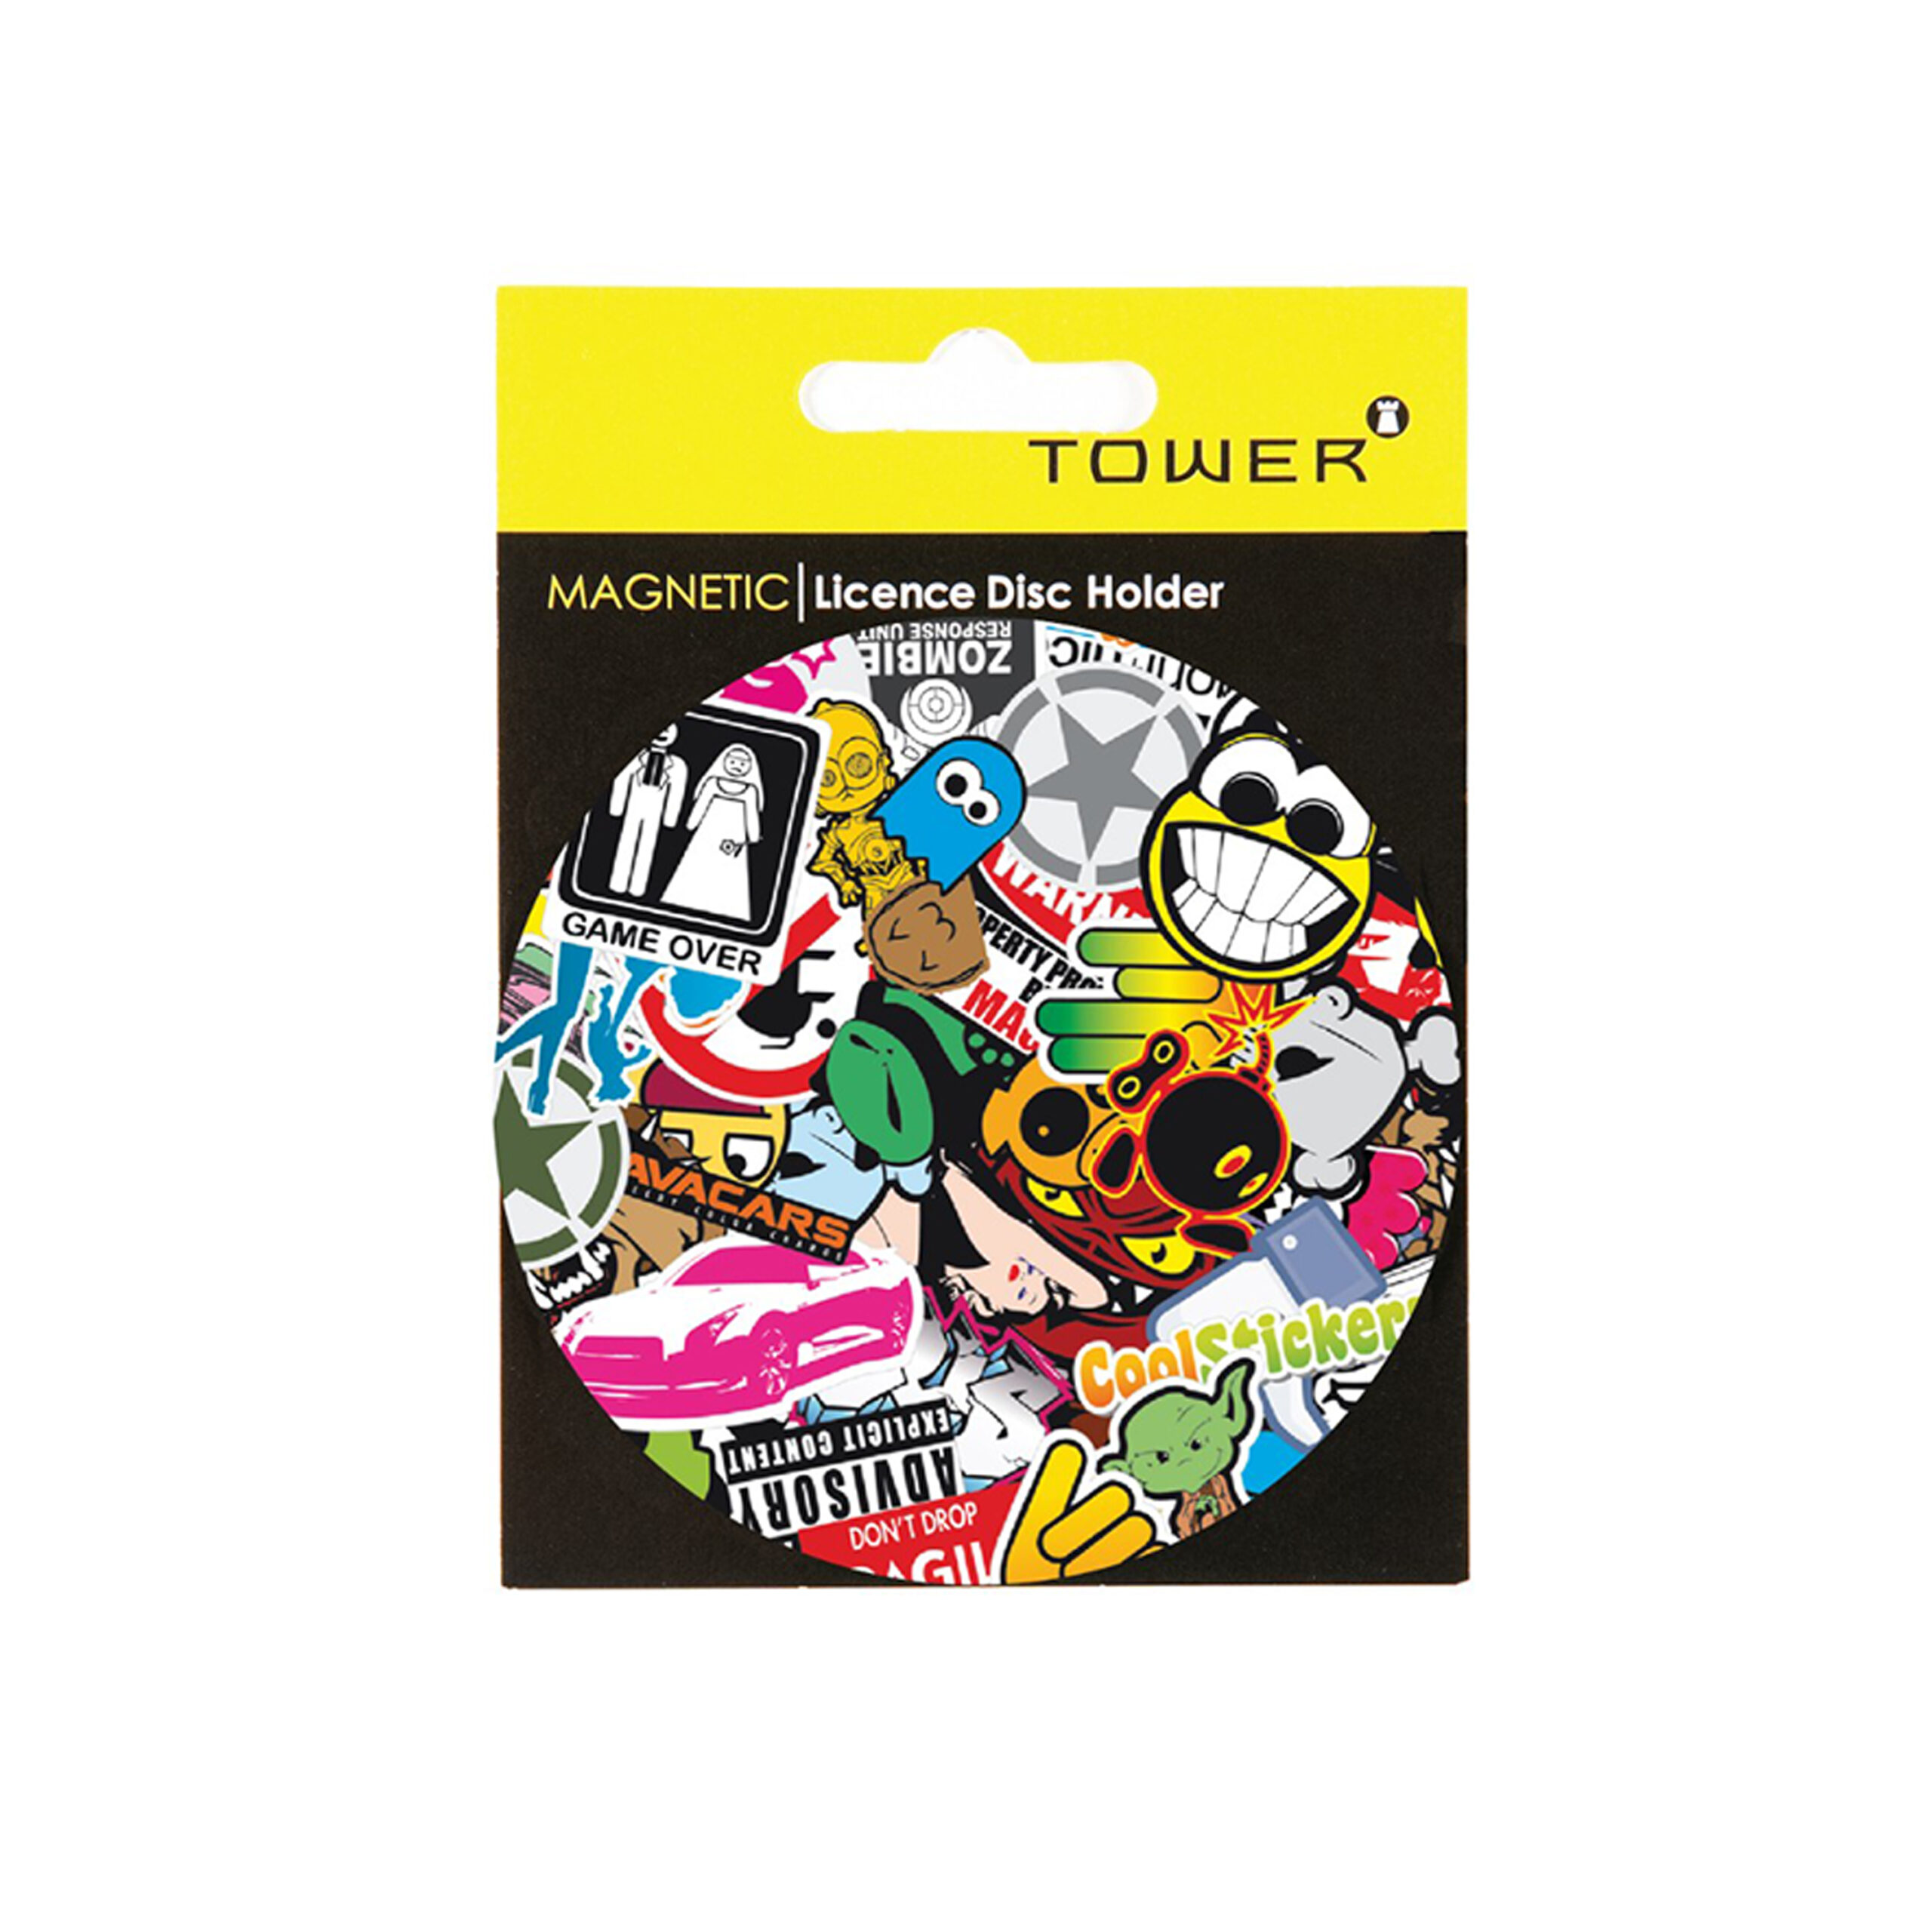 TOWER  MAGNETIC
LICENCE DISC
HOLDER  "STICKER
BOMB"